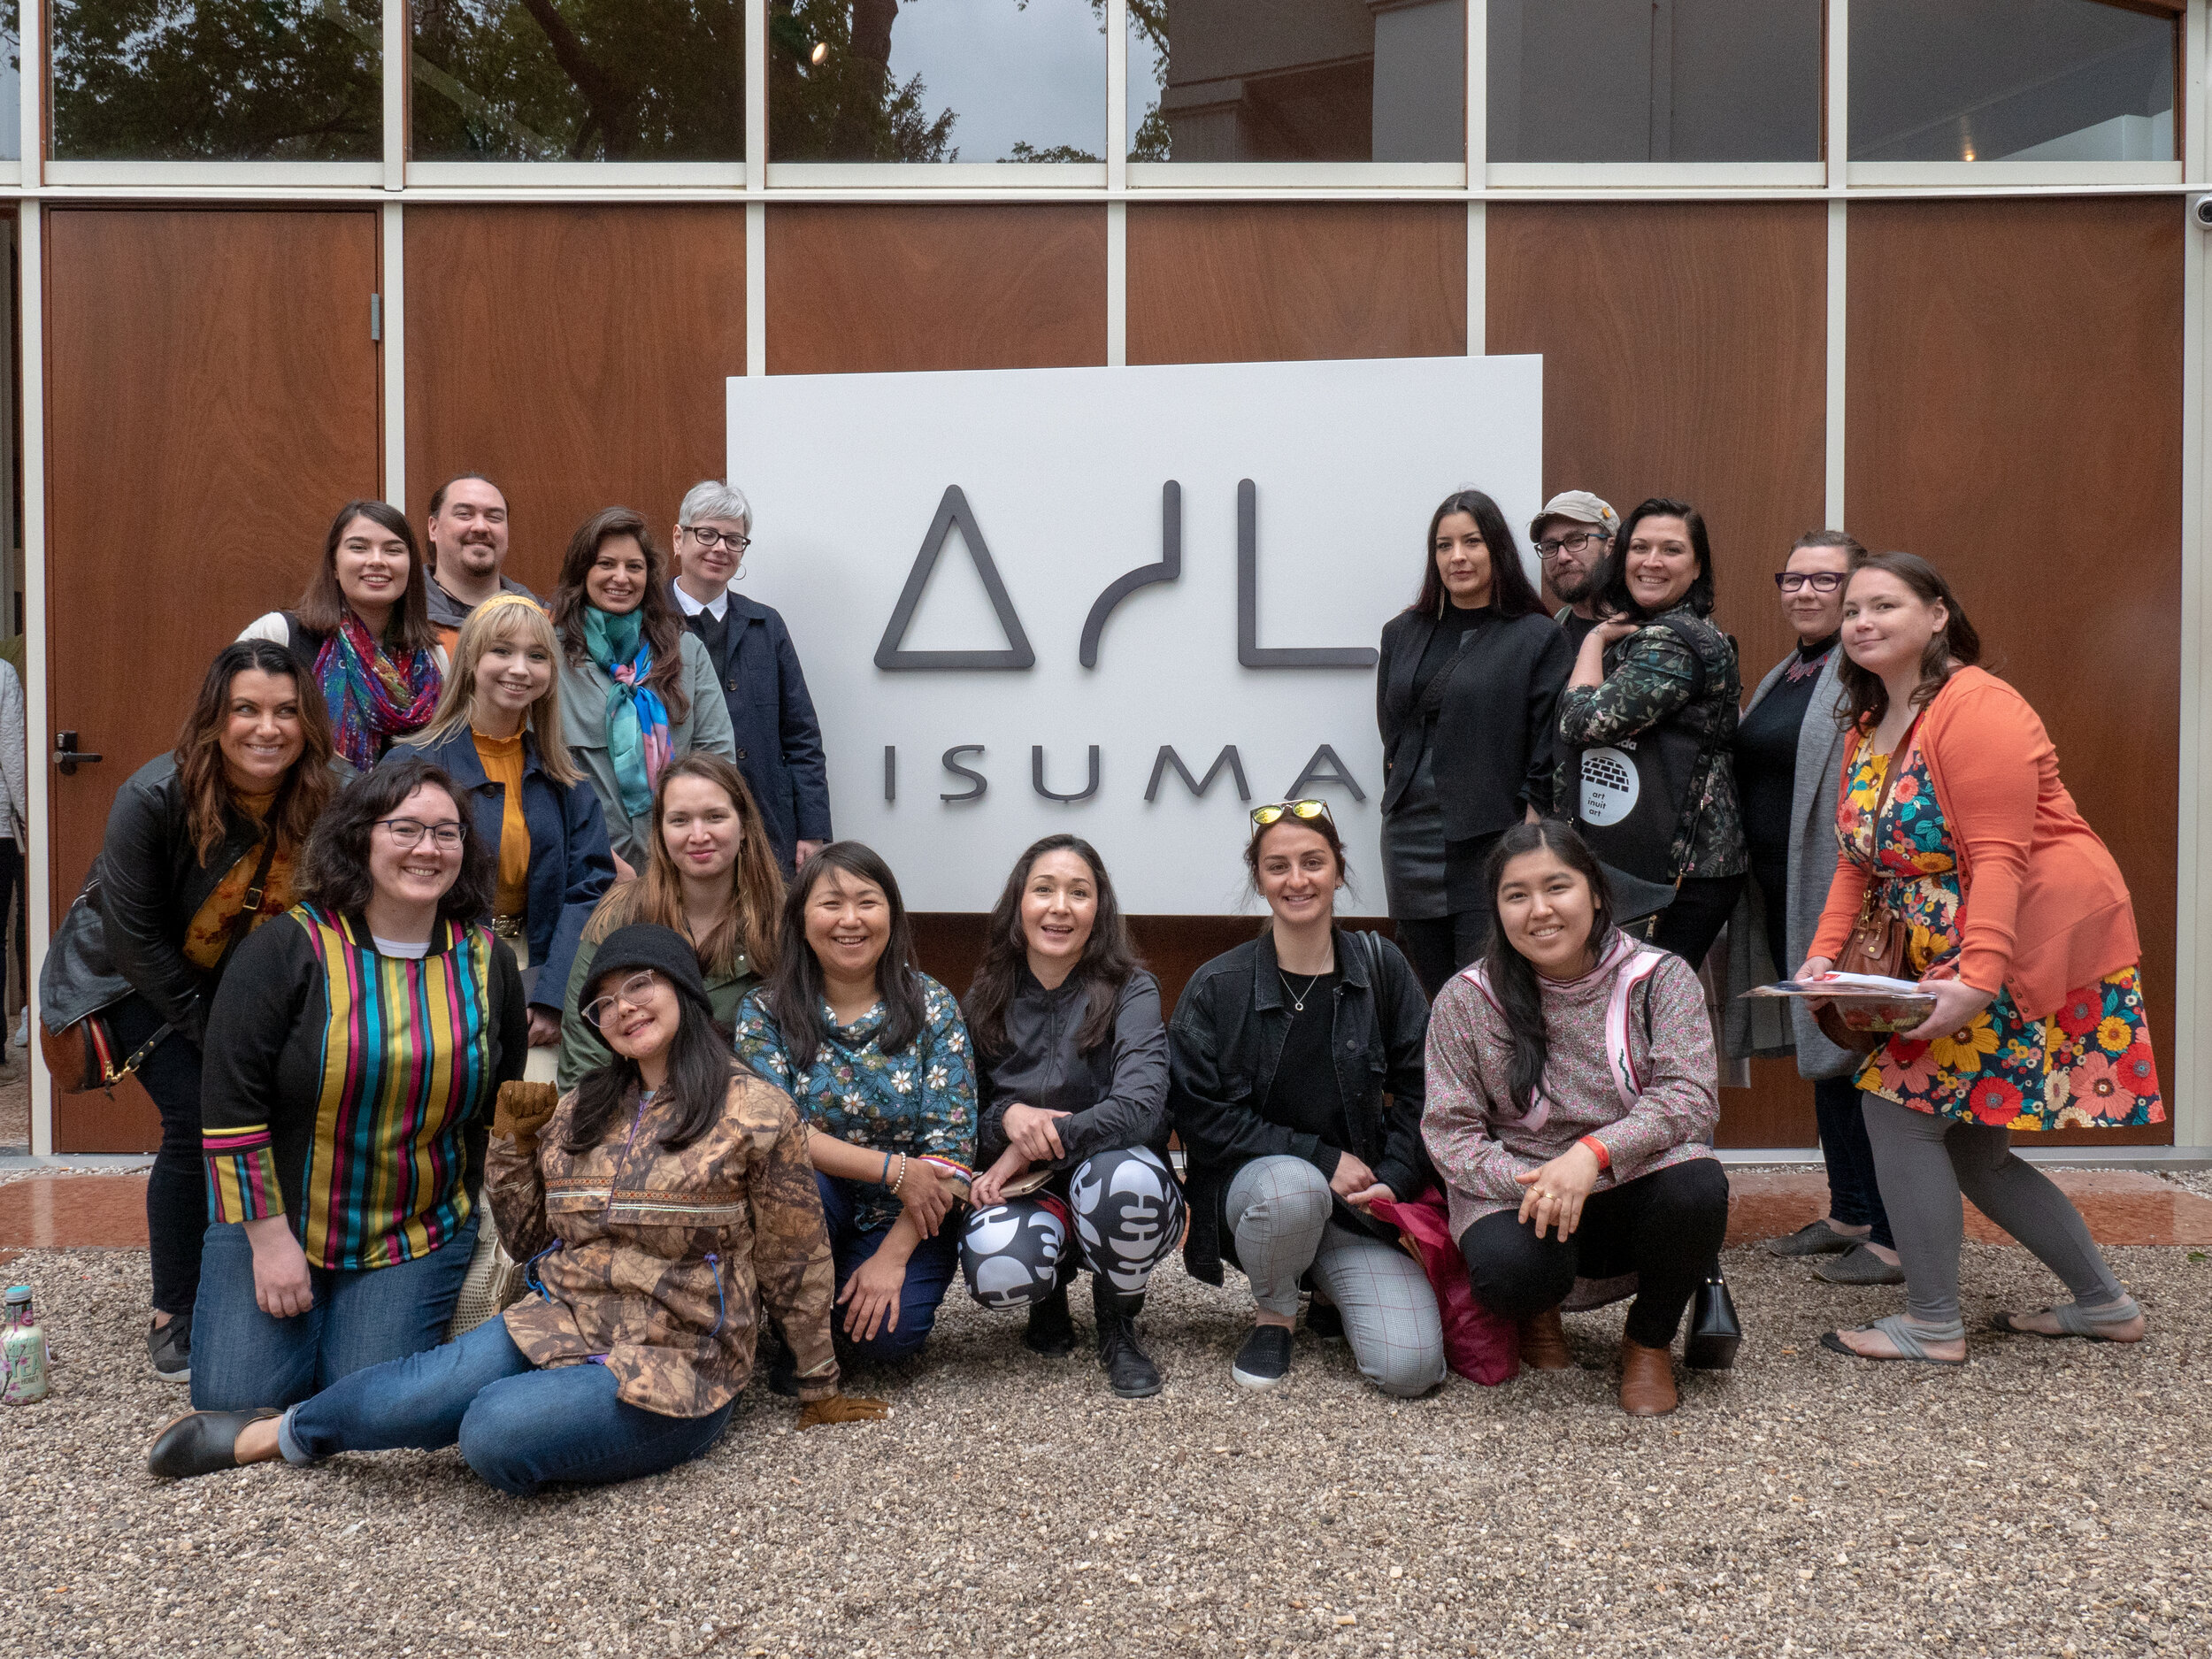  Inuit Futures first year cohort at the Isuma exhibition at the Canadian Pavilion of the Venice Biennale, May 2019. Photo by Tom McLeod. 